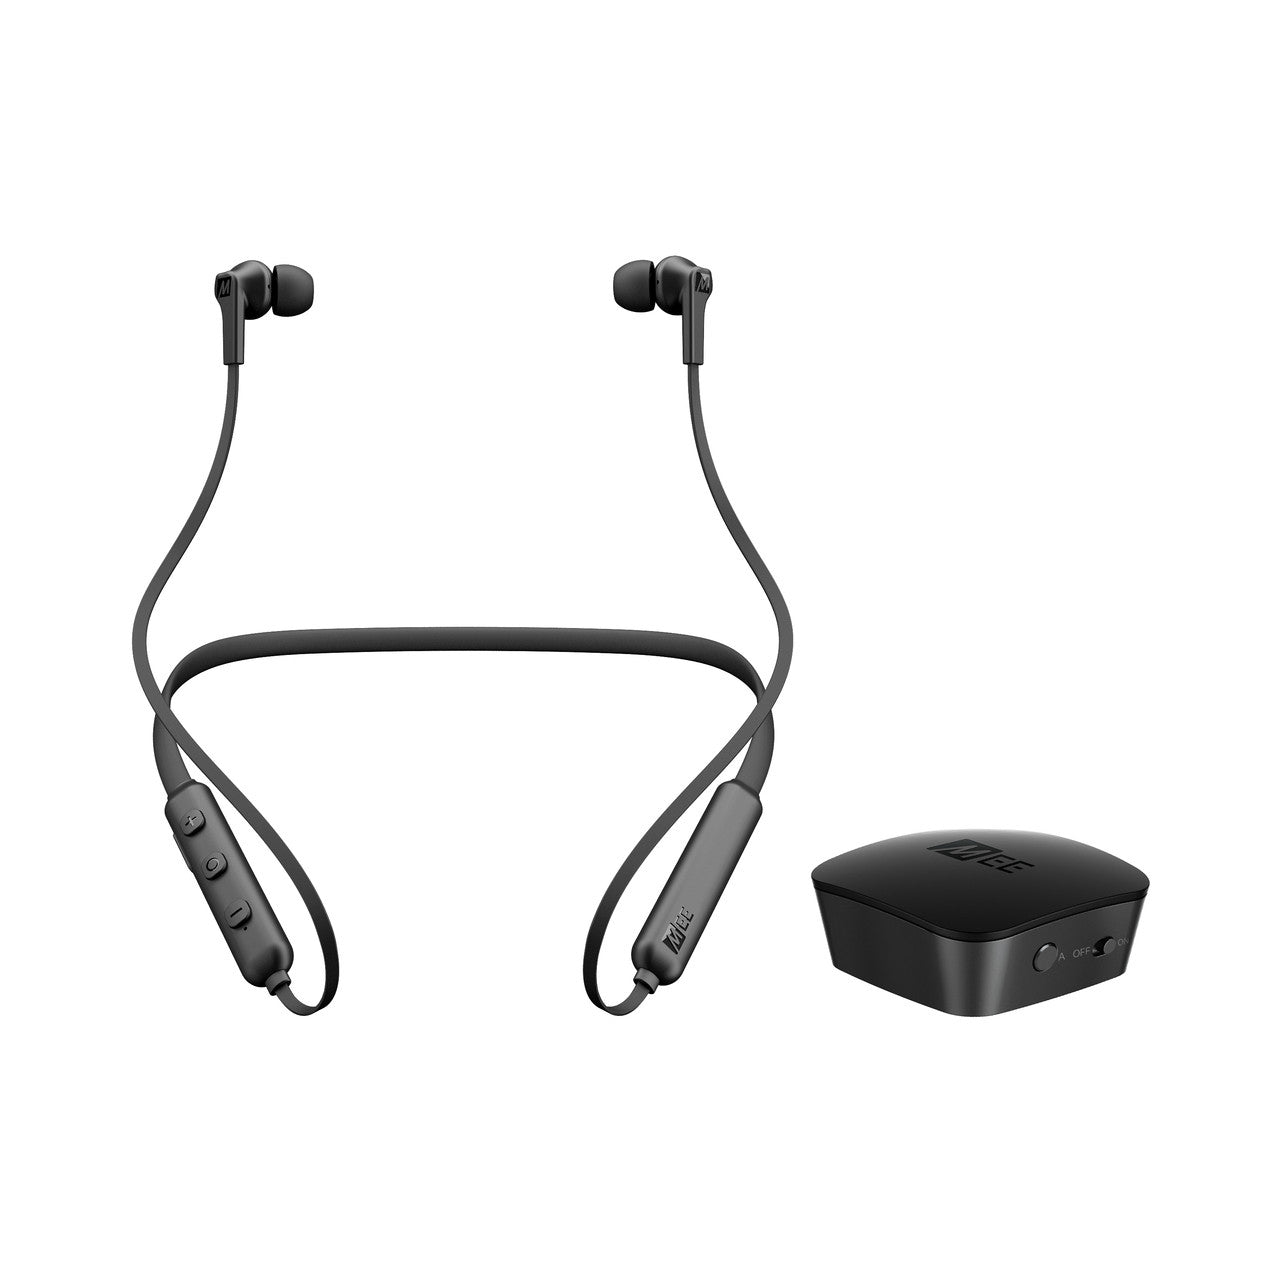 Image of [Refurbished] Connect T1N1 Wireless Headphone System for TV - Includes Bluetooth Transmitter and Neckband Headphones.